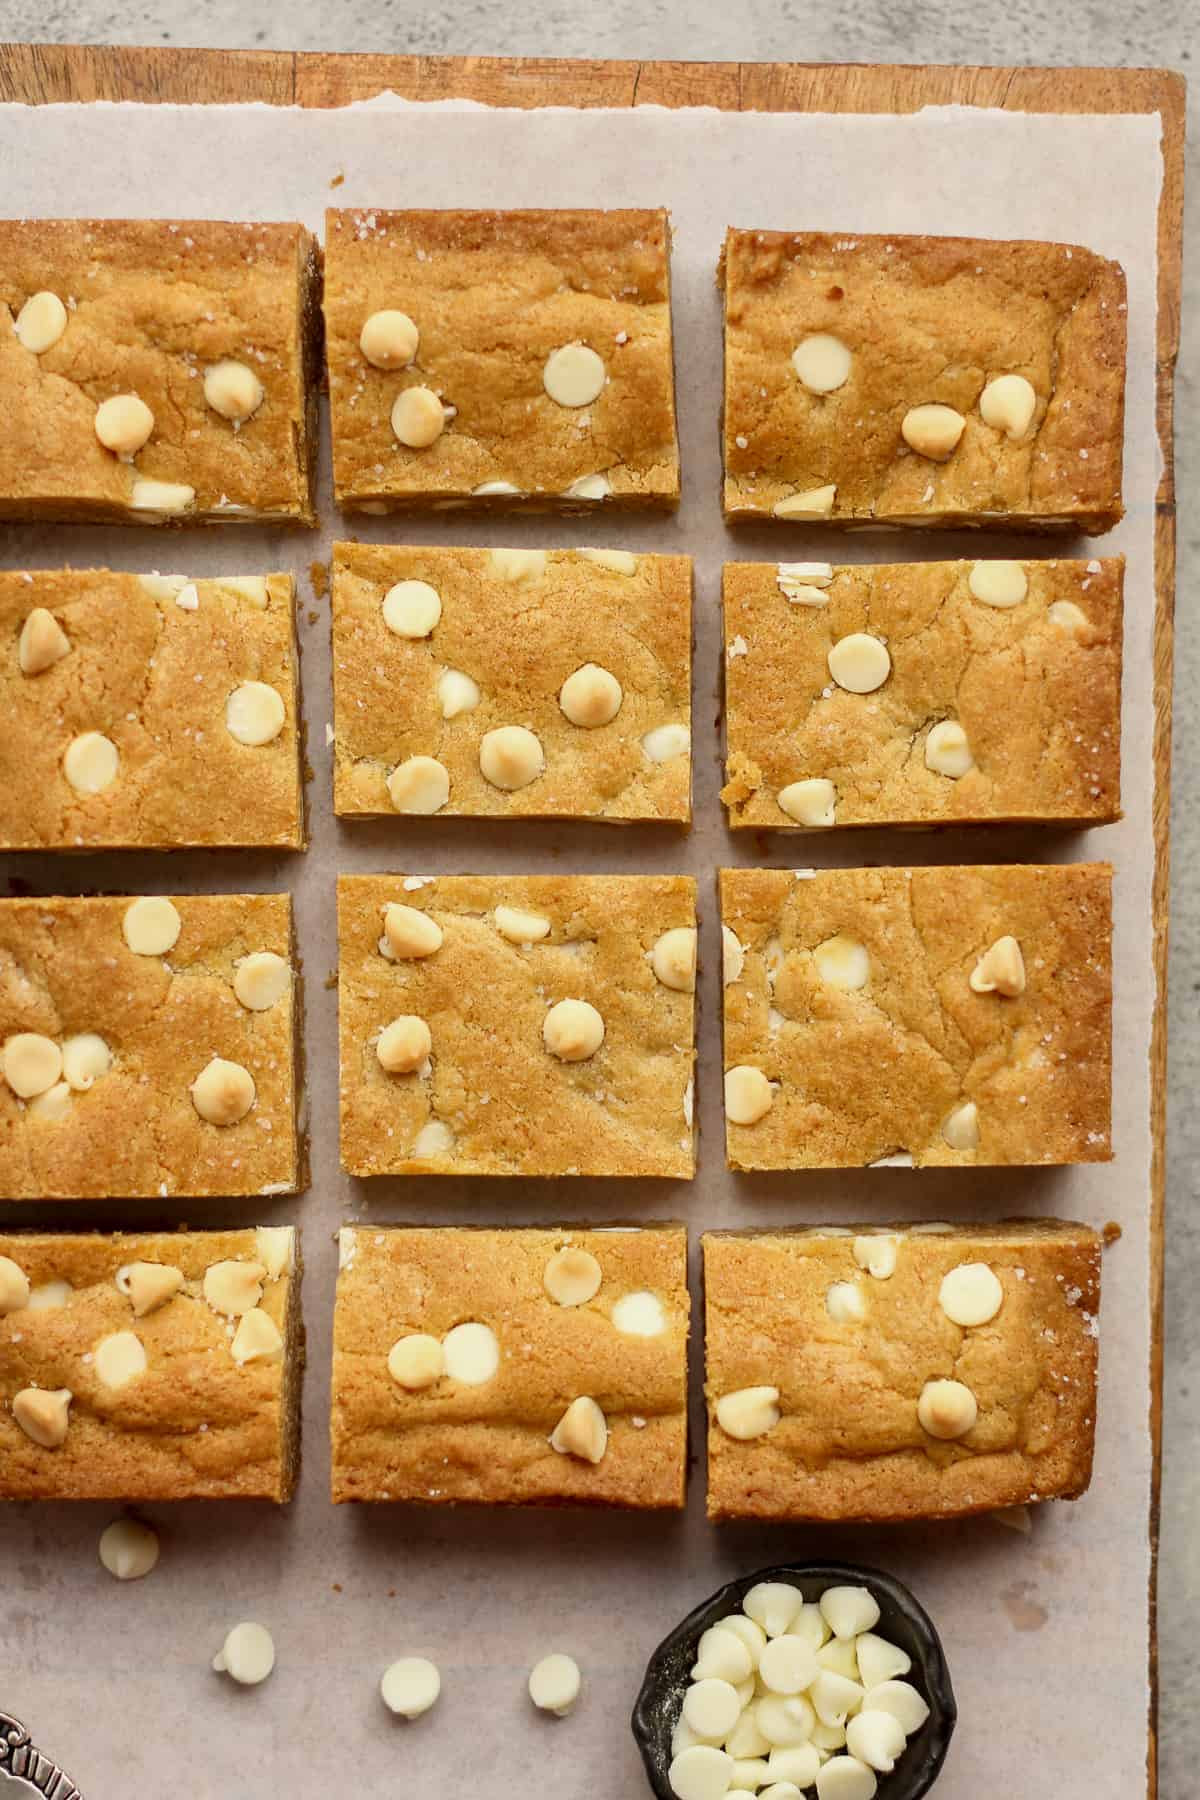 Overhead view of 12 sliced blondies with white chocolate chips.